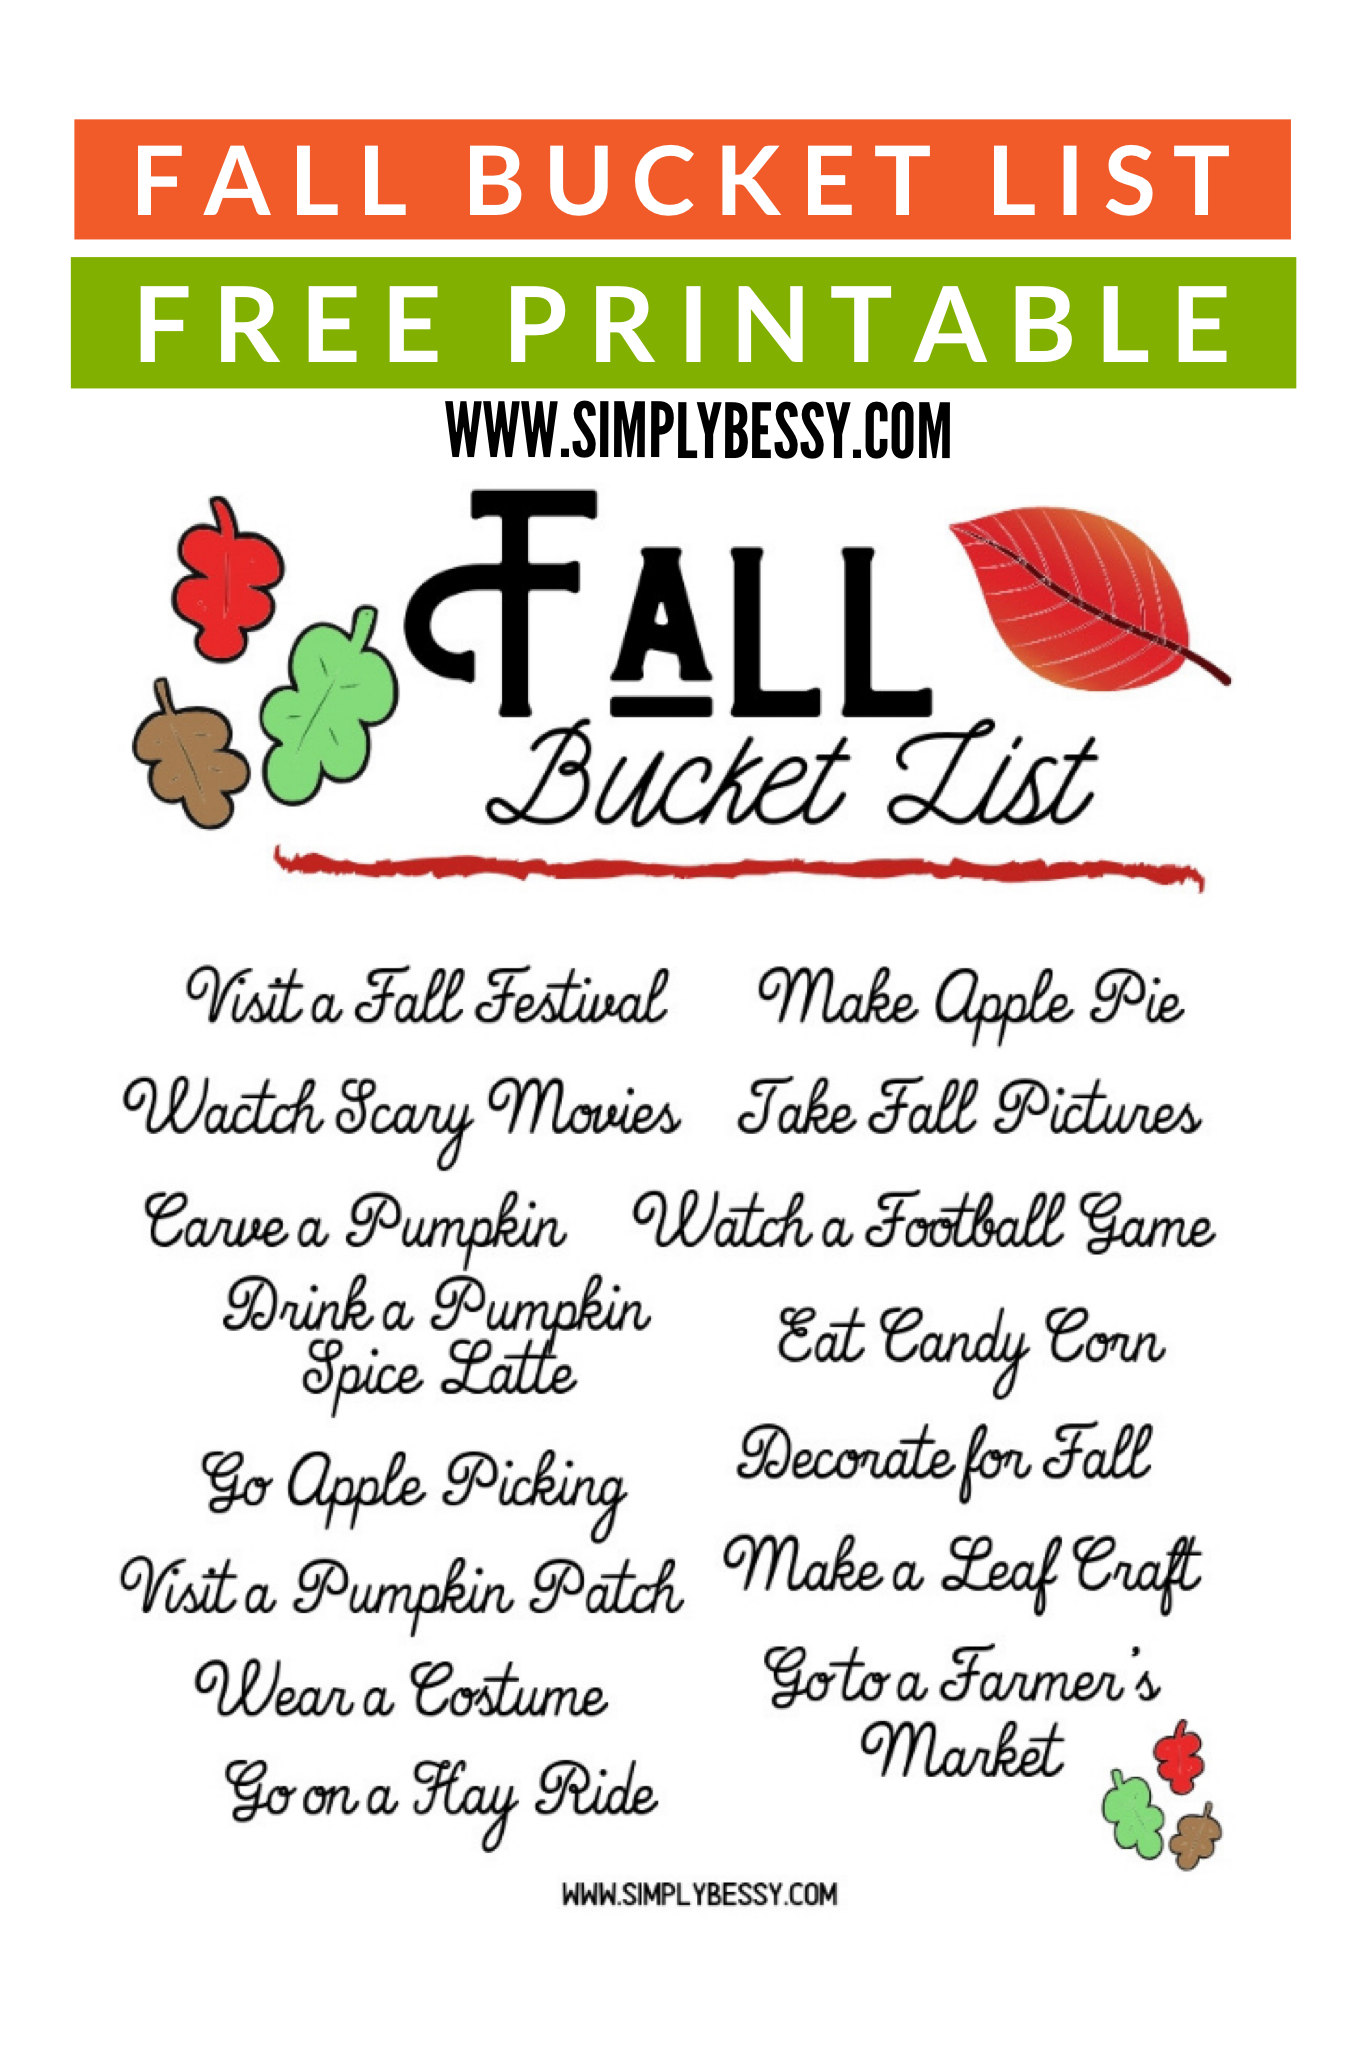 Free Printable Fall Bucket List For The Whole Family Made With HAPPY